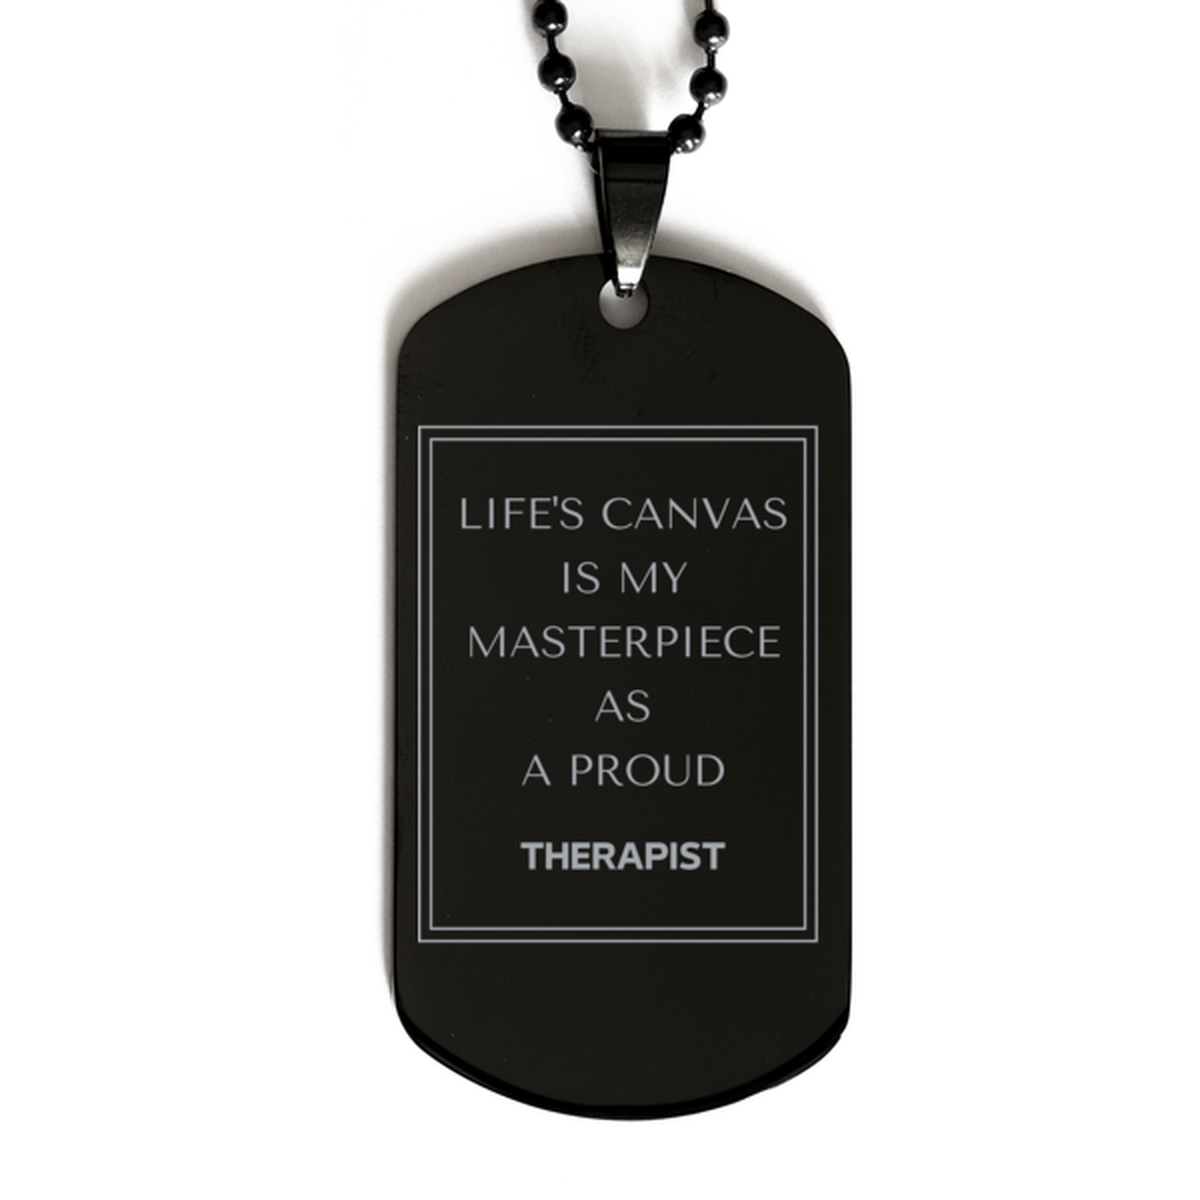 Proud Therapist Gifts, Life's canvas is my masterpiece, Epic Birthday Christmas Unique Black Dog Tag For Therapist, Coworkers, Men, Women, Friends